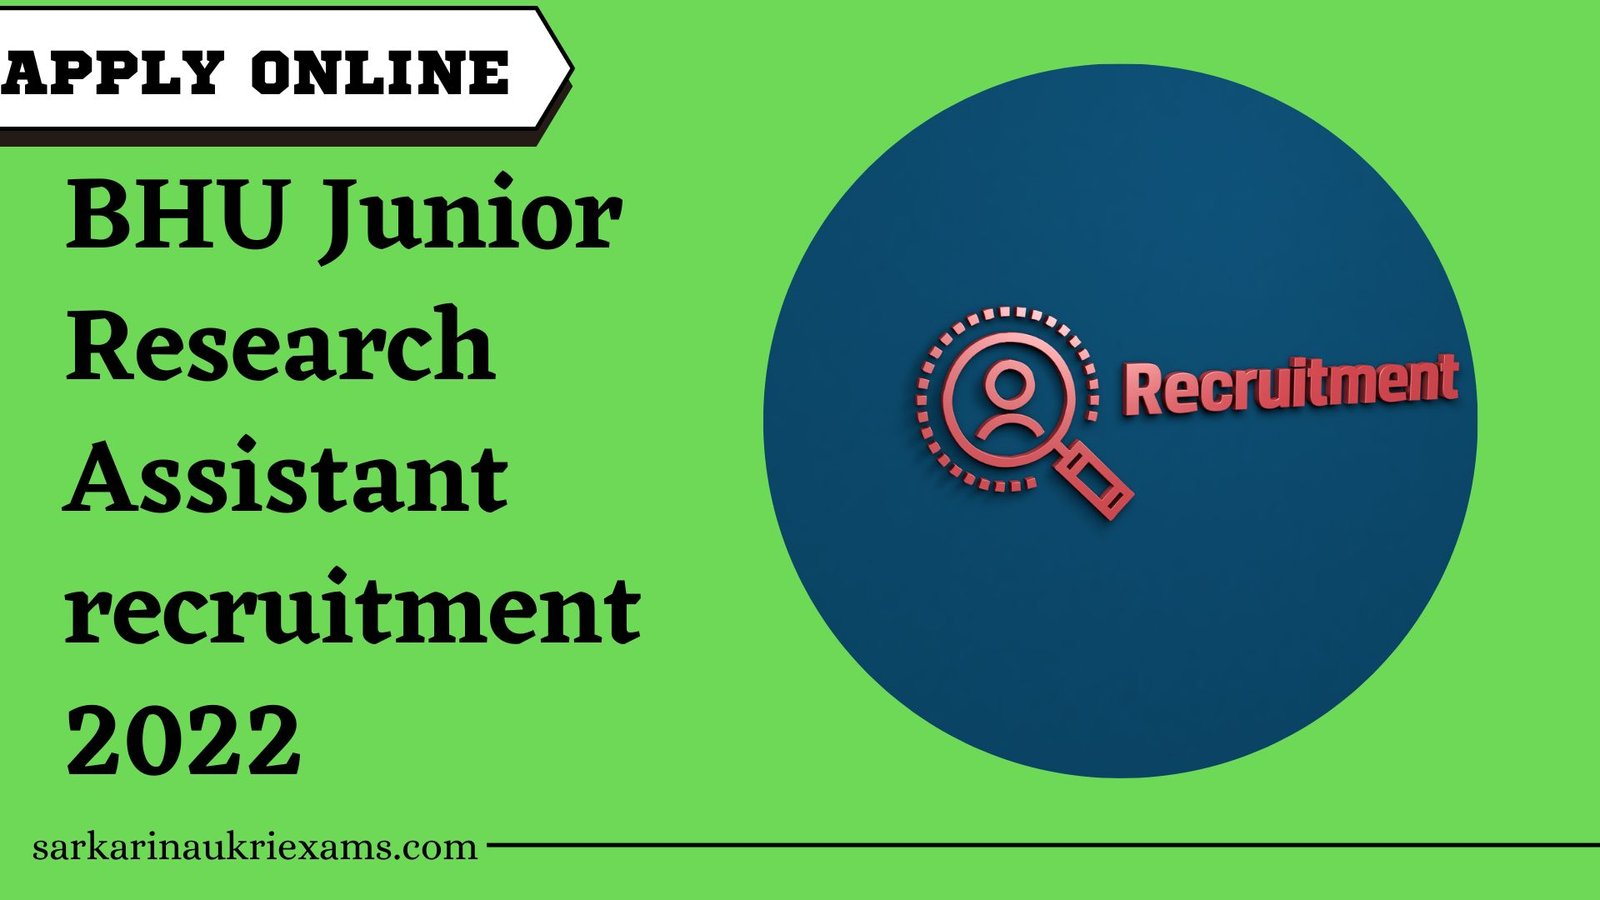 BHU Junior Research Assistant recruitment 2022 | Apply Online